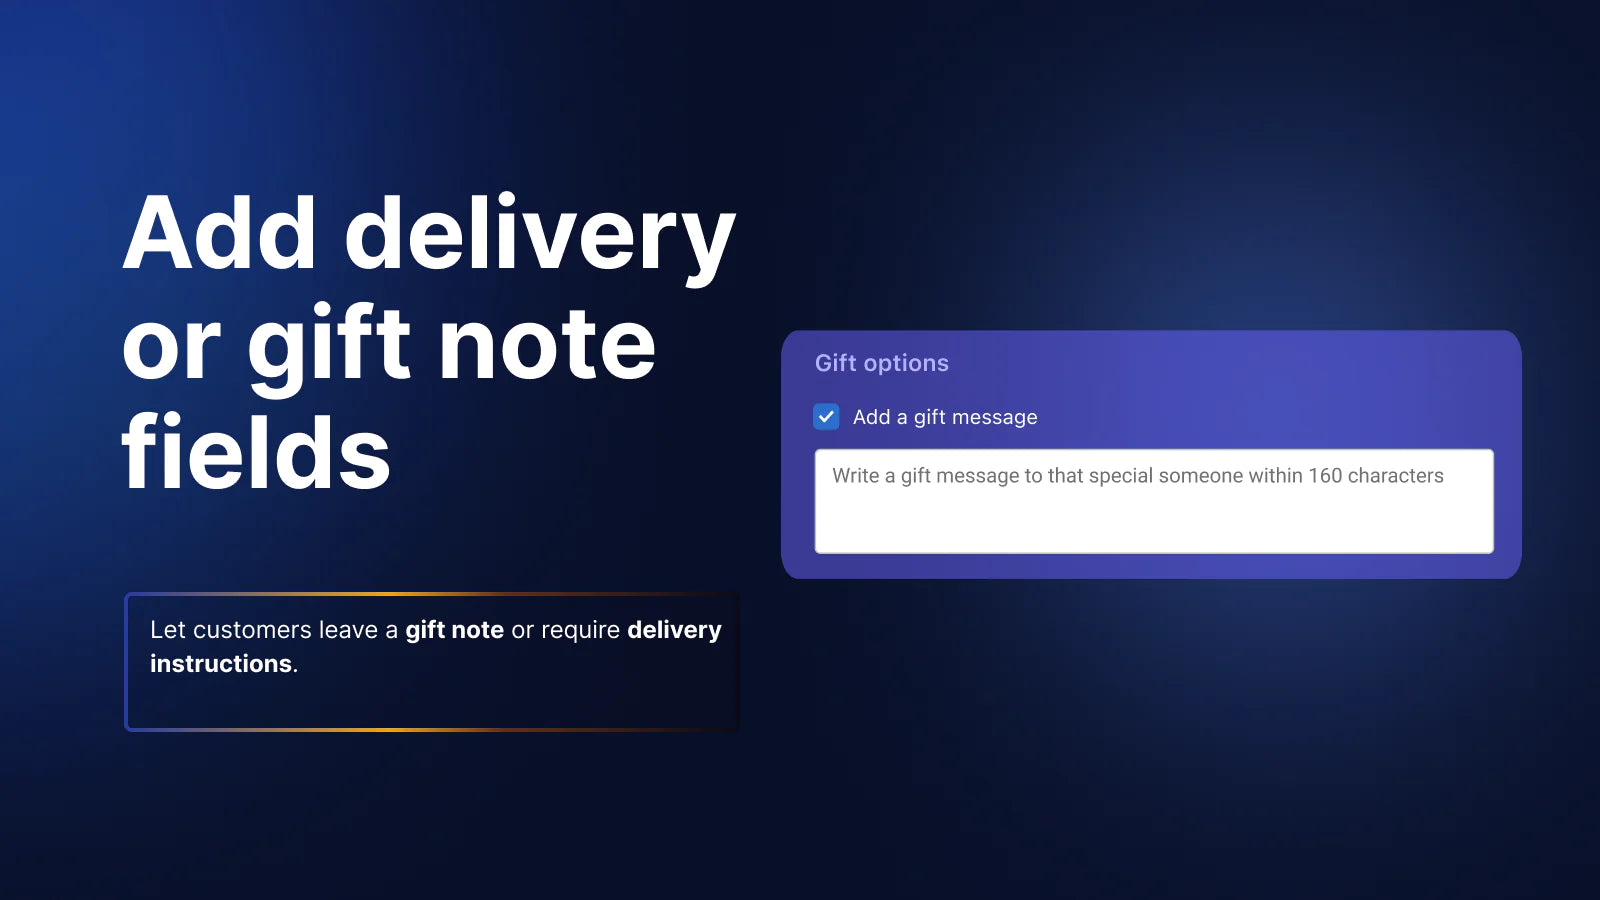 The image shows that you can add a delivery or gift note.